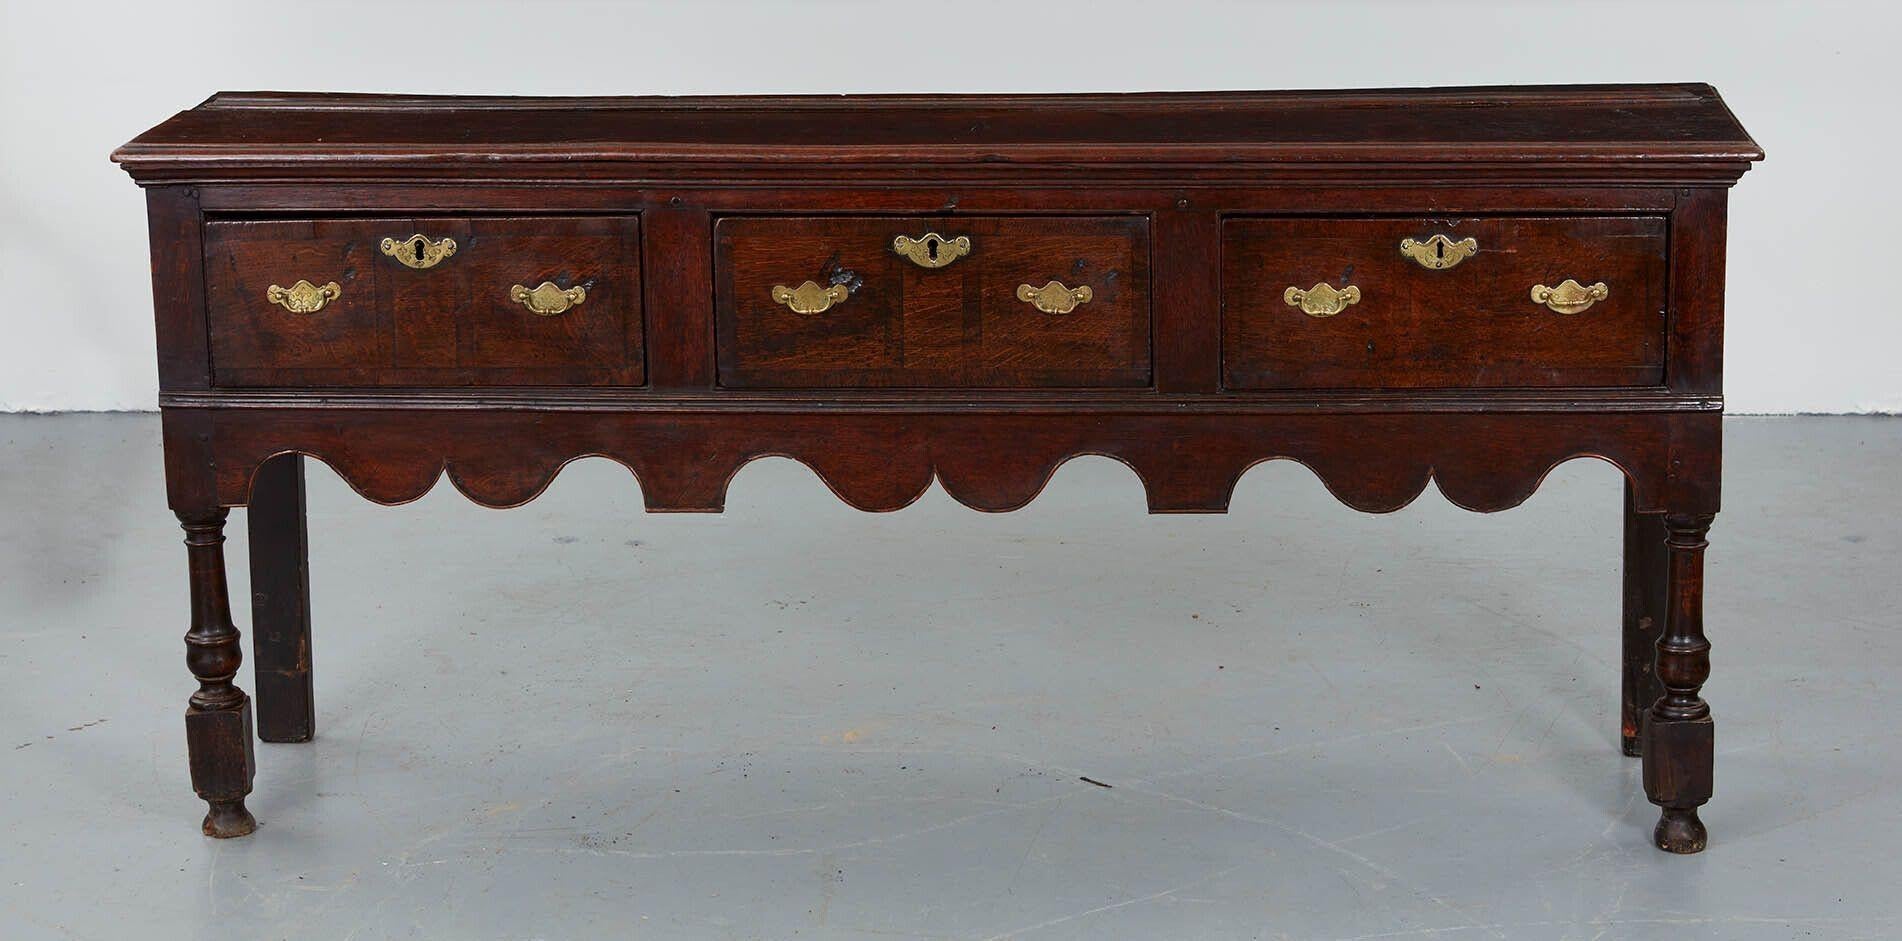 An 18th century dresser base in oak with an imposing stance and excellent color. Three drawers each with two handles and an escutcheon over a scalloped apron, standing on turned and blocked front legs.